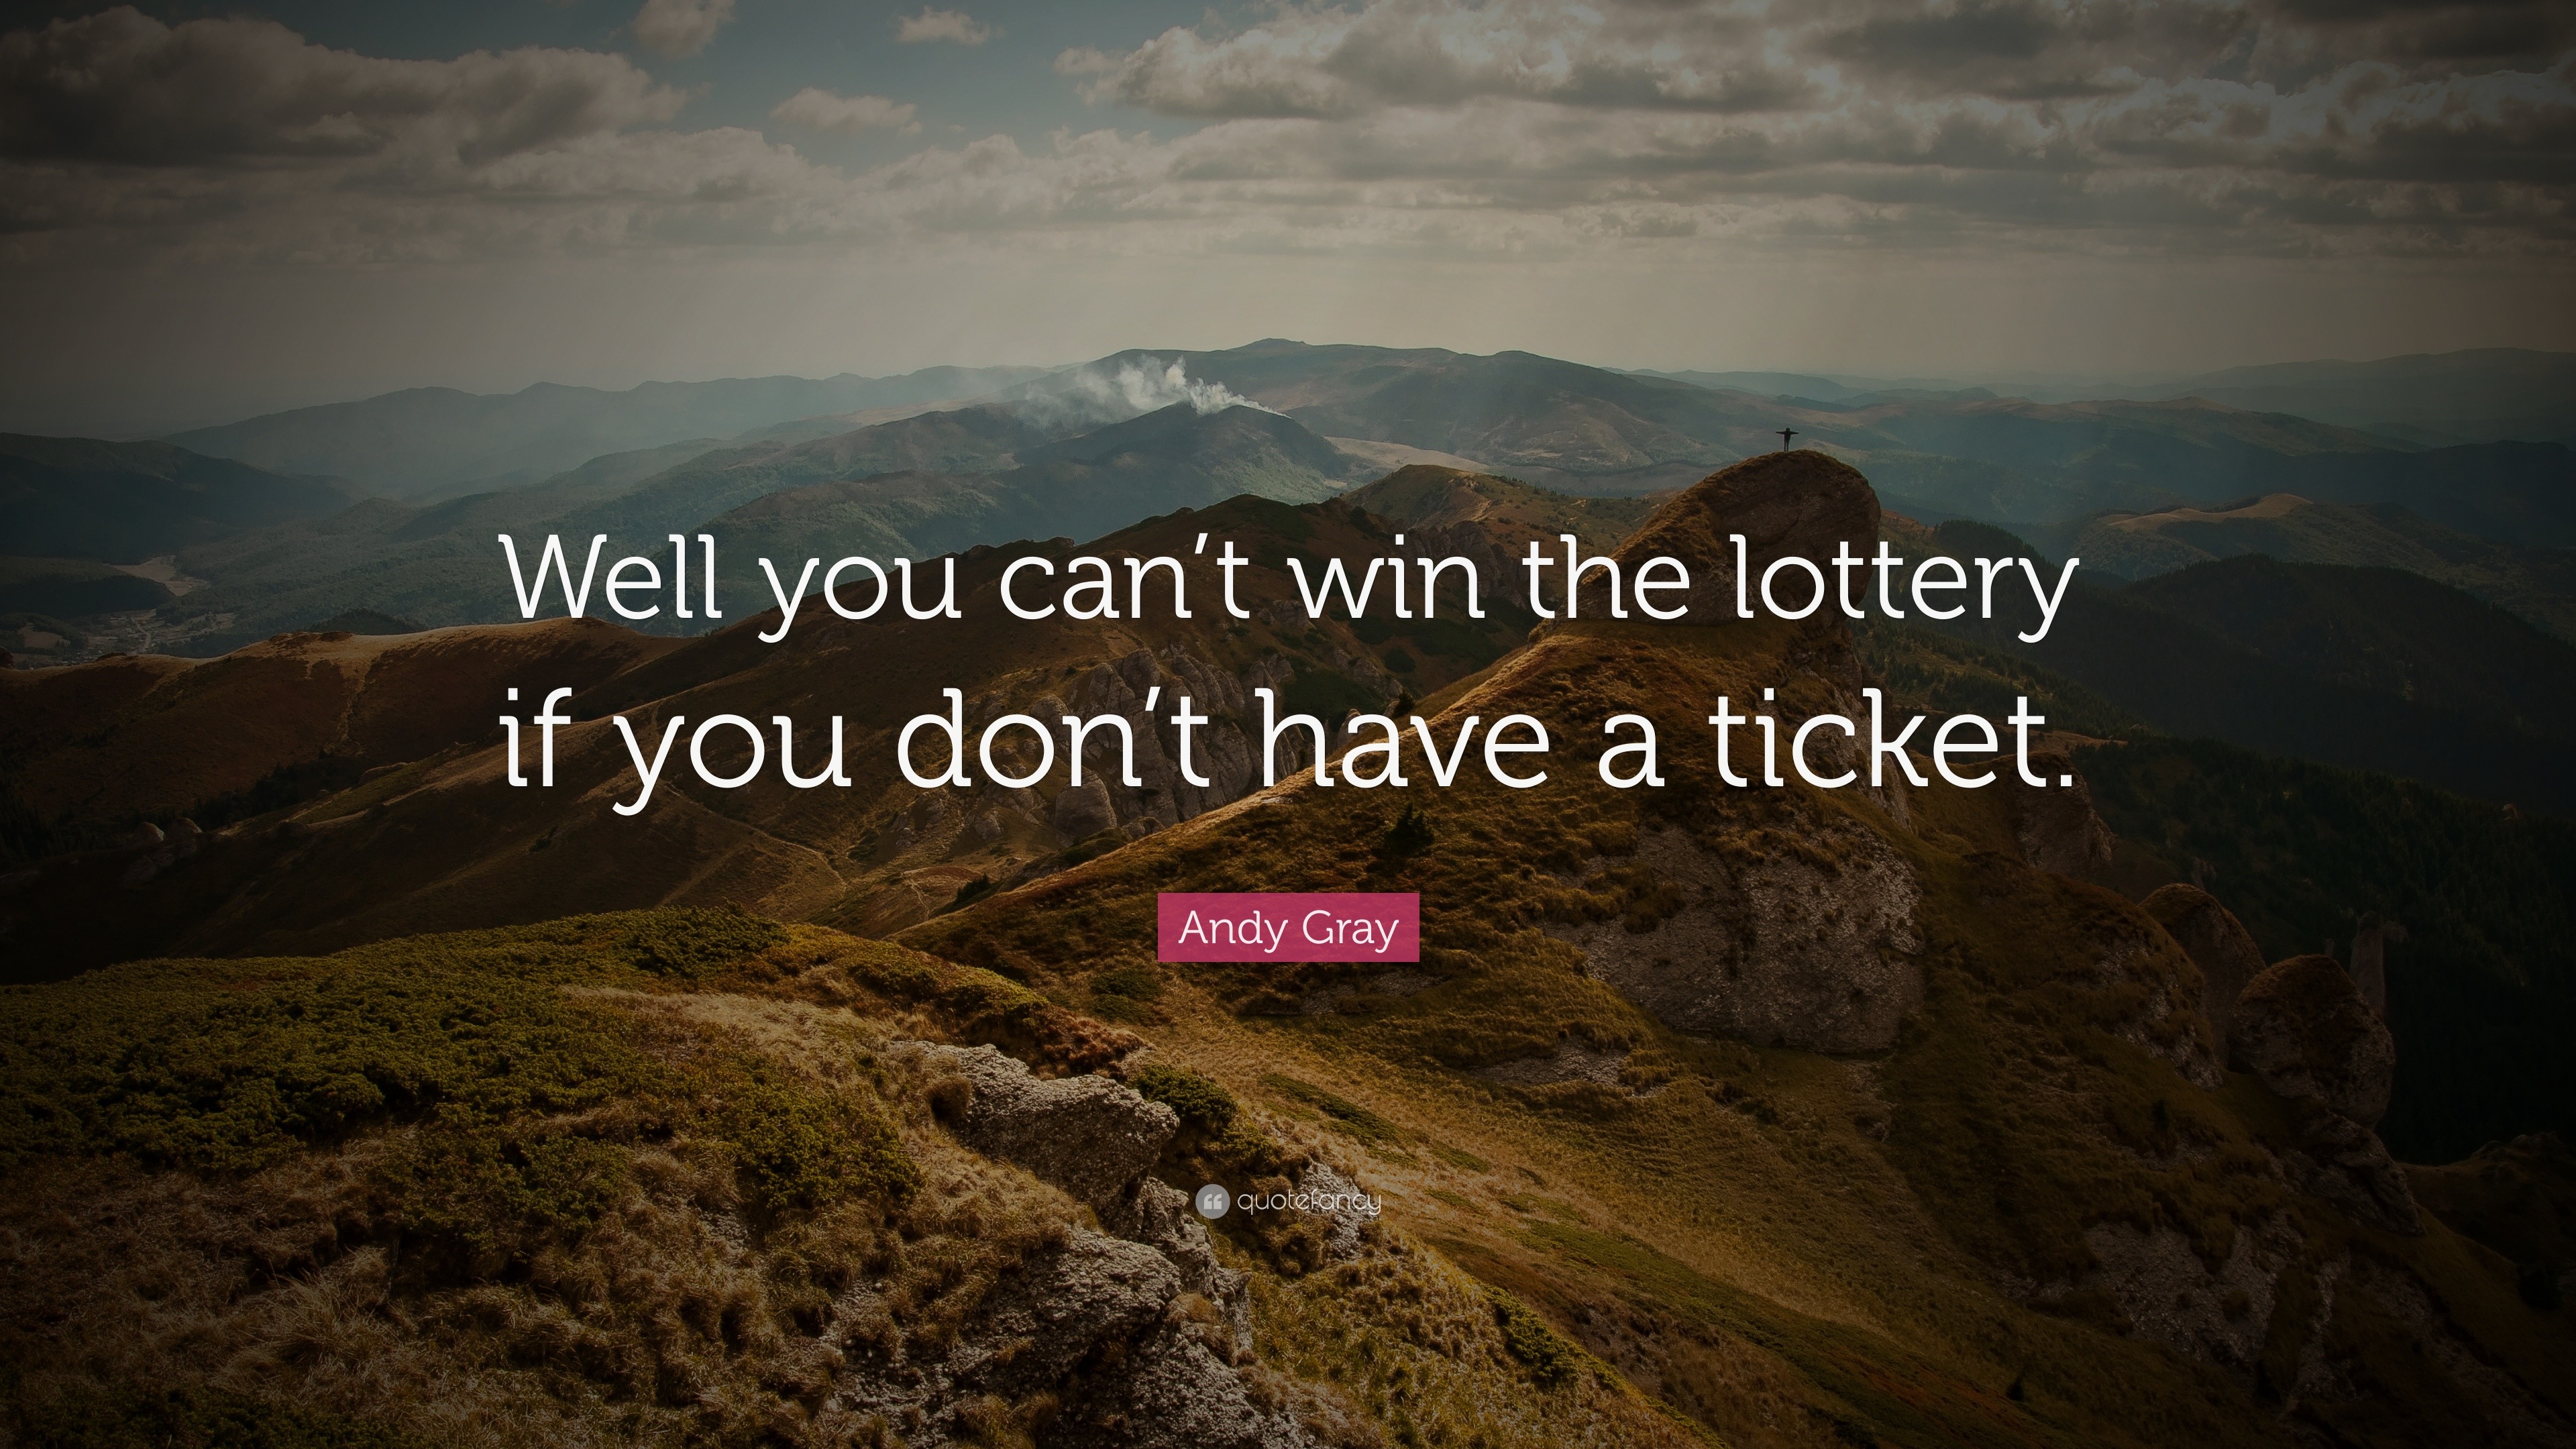 Andy Gray Quote: “Well you can't win the lottery if you don't have a